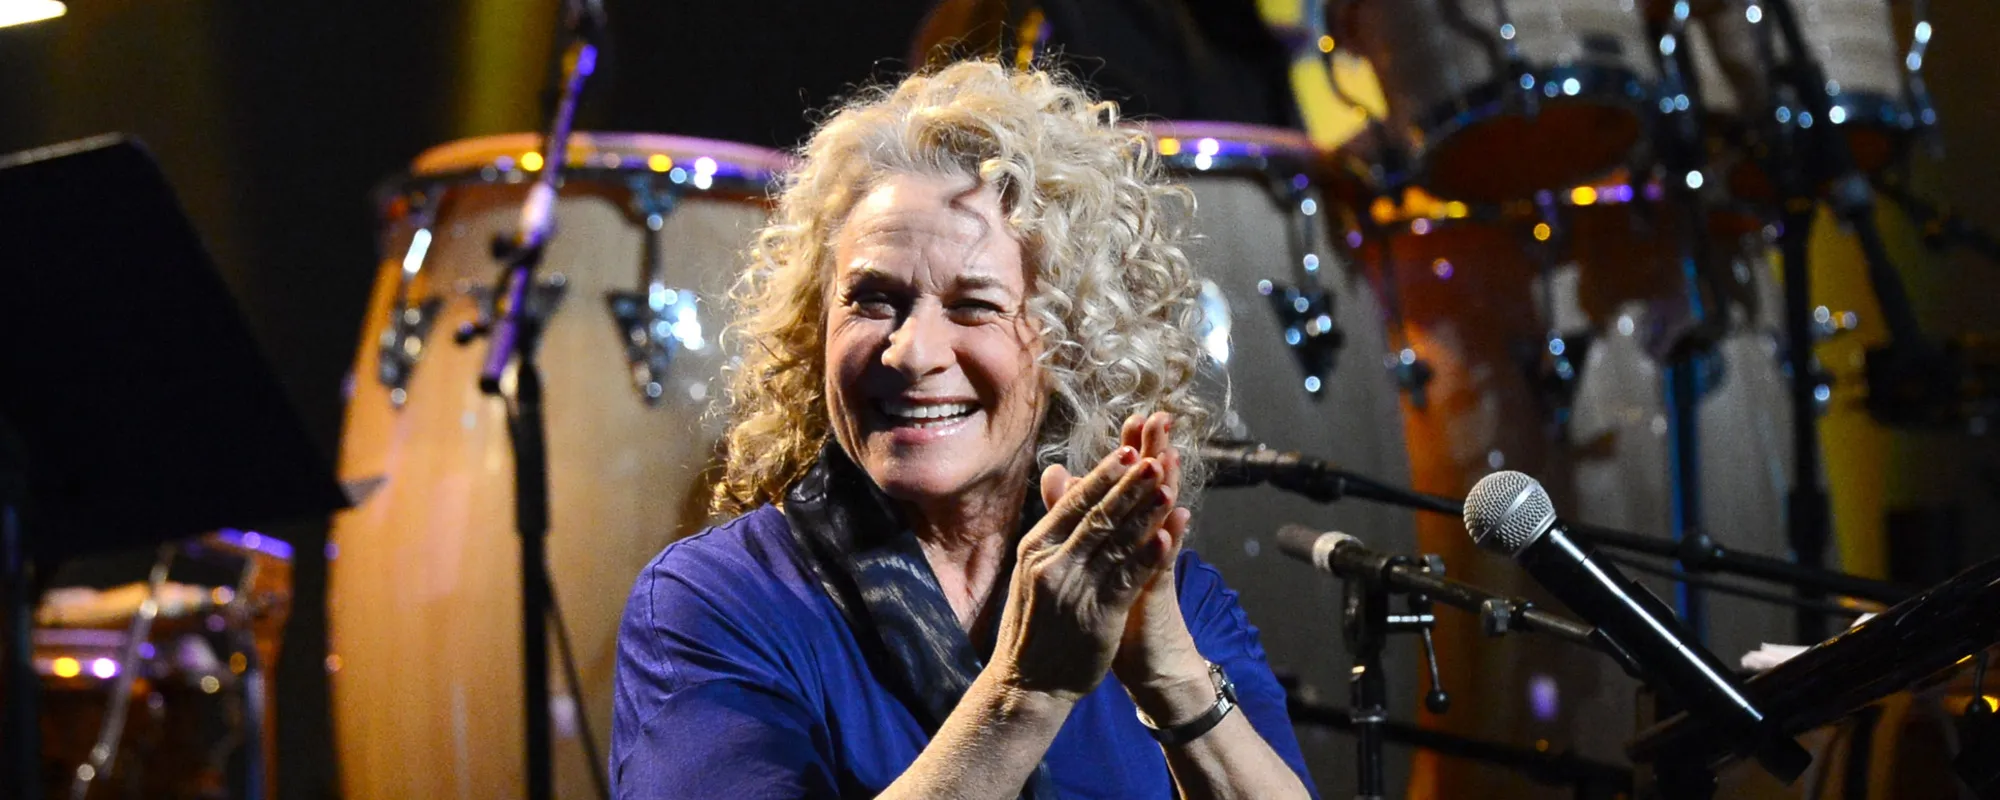 The True-to-Life Meaning Behind “It’s Too Late” by Carole King